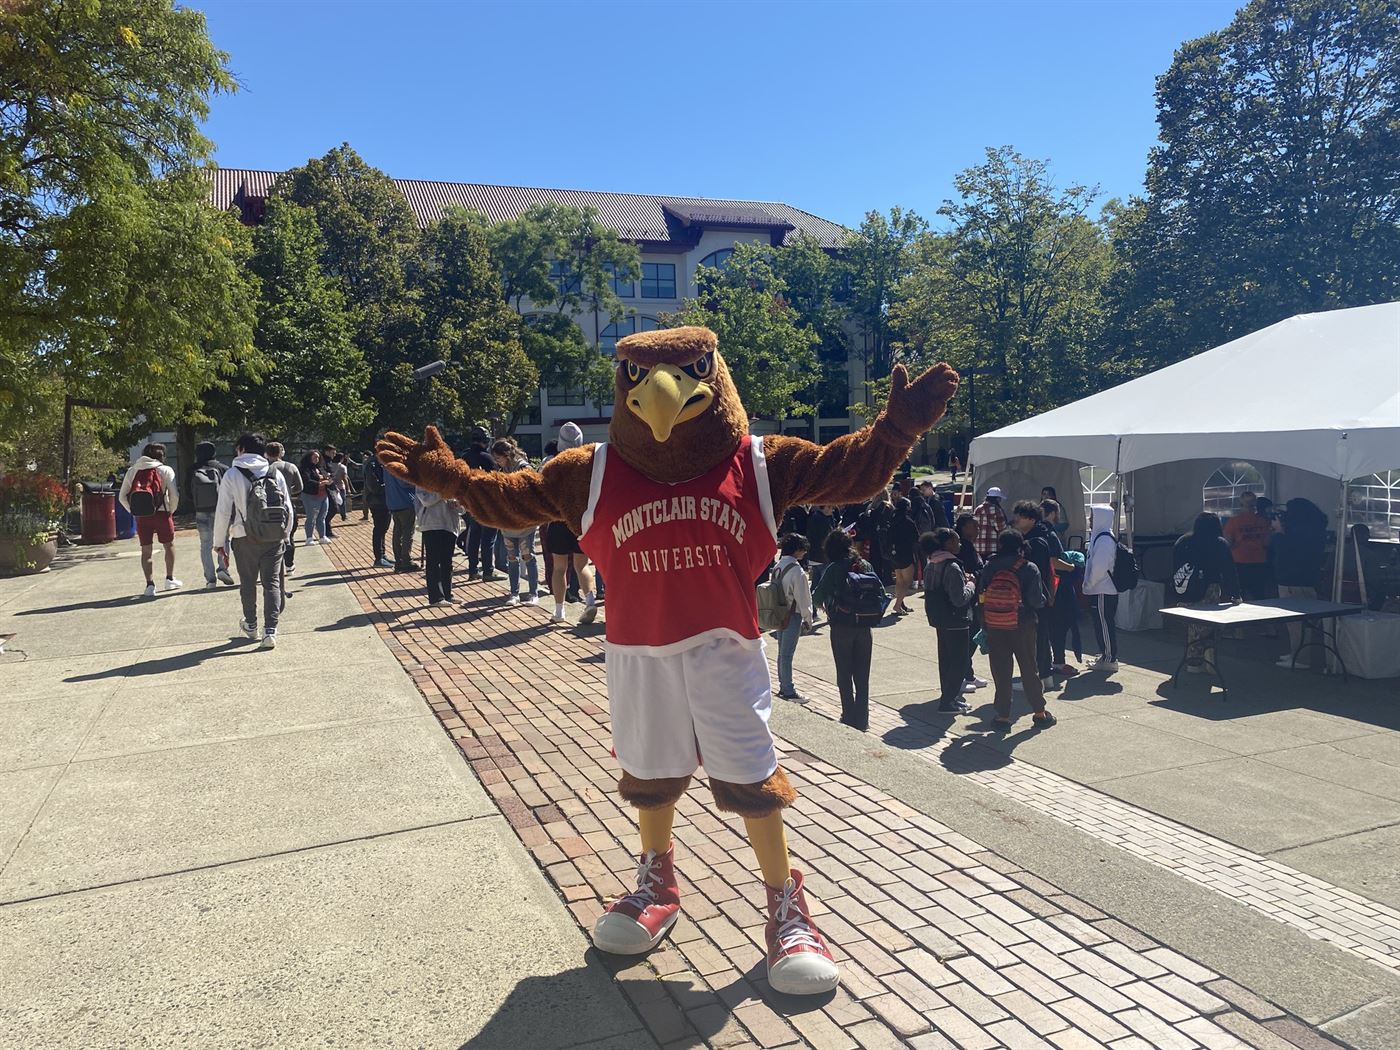 Rocky the Red Hawk made an appearance at the filming location, Montclair State's Psychic Fair. Photo courtesy of Jackie Memoly